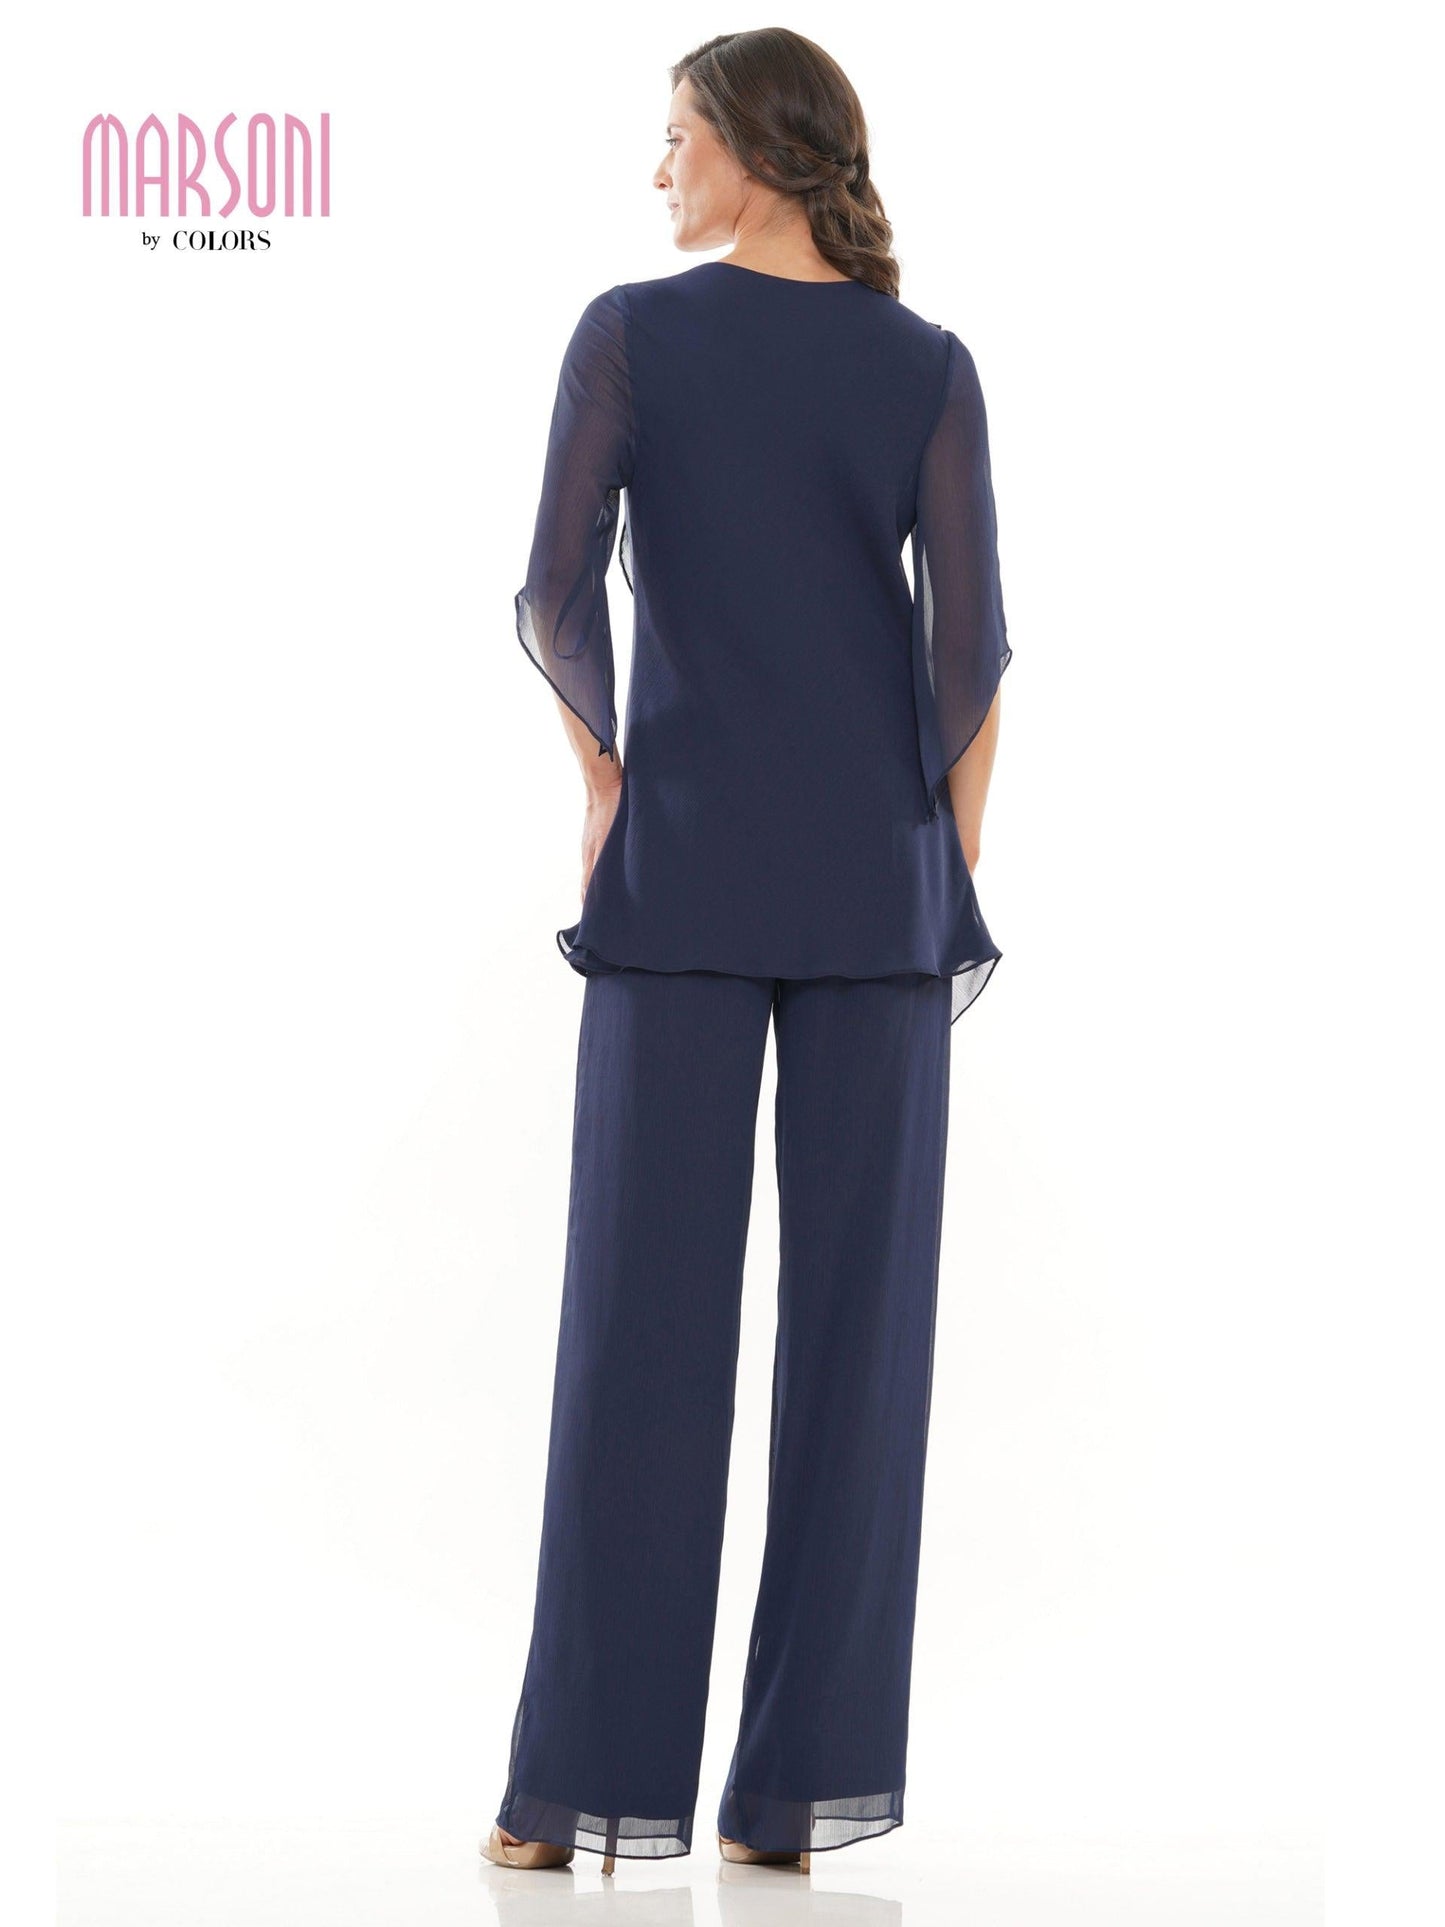 Marsoni Formal Mother of the Bride Pant Suit 308 - The Dress Outlet